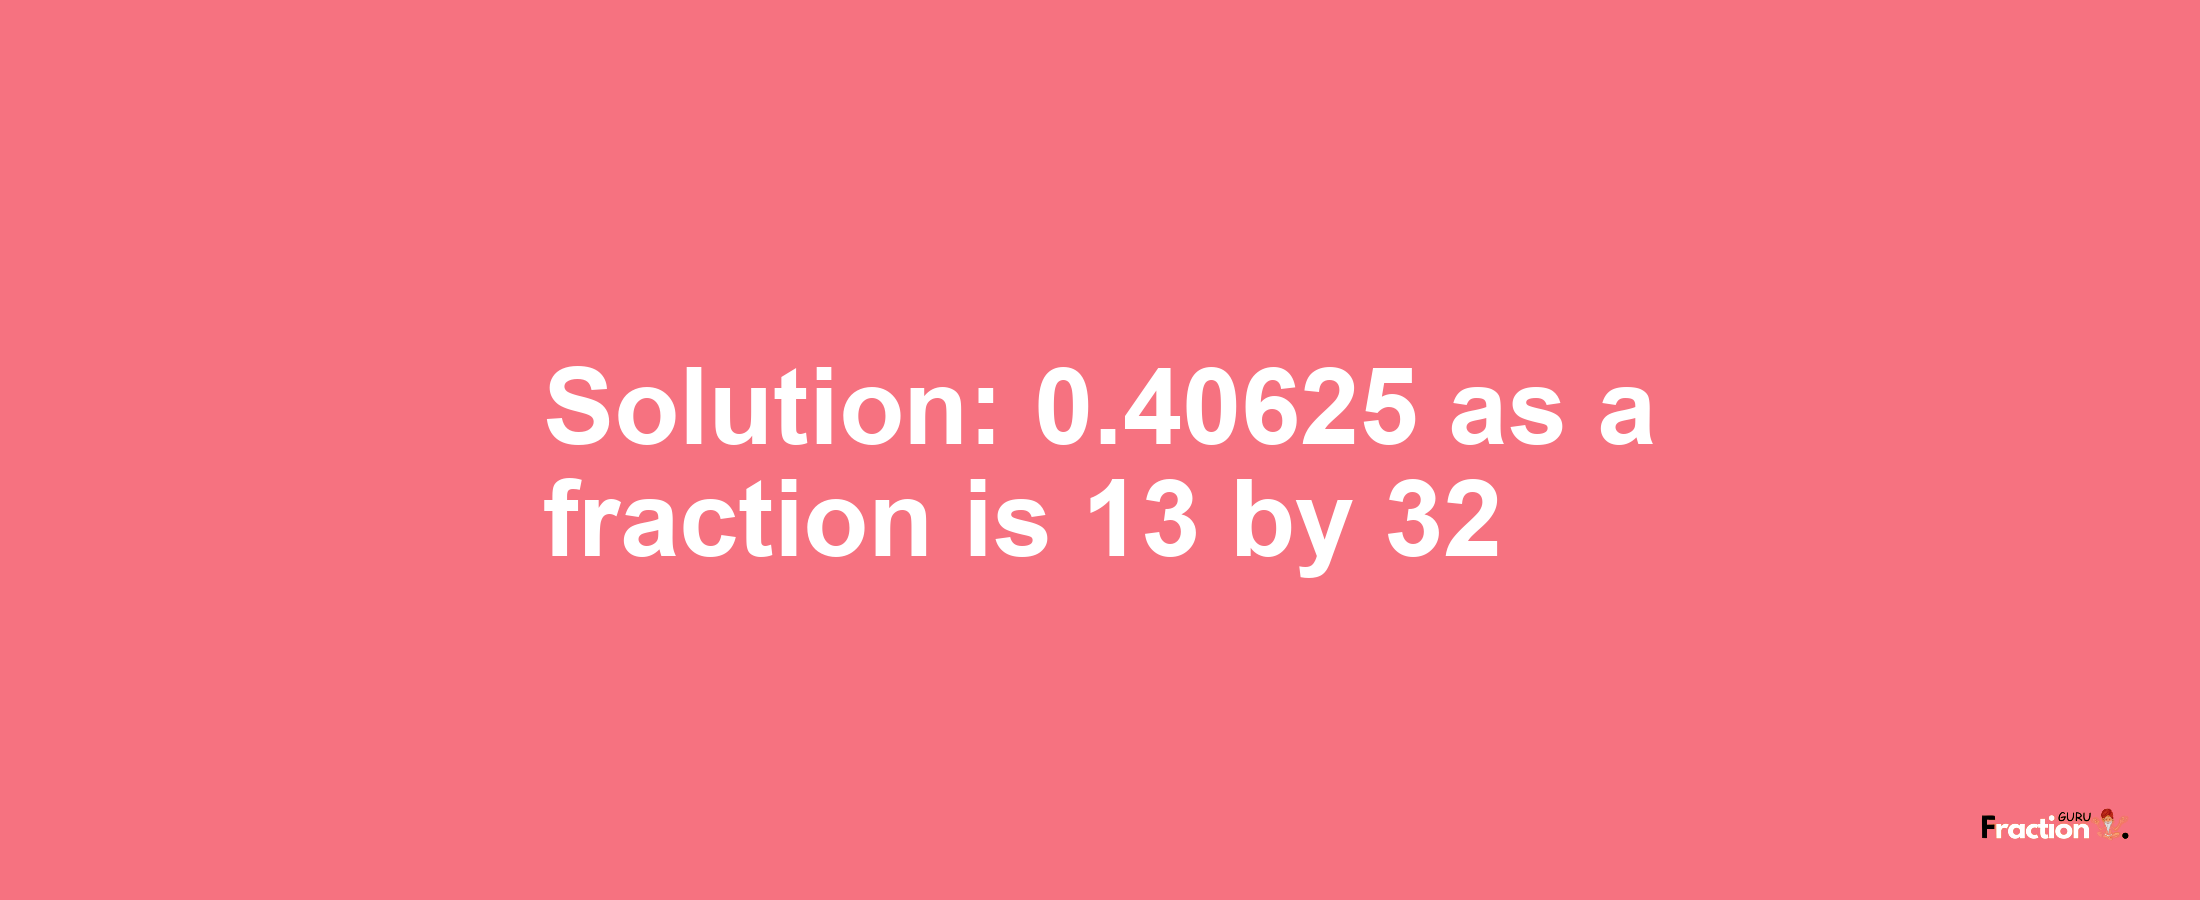 Solution:0.40625 as a fraction is 13/32